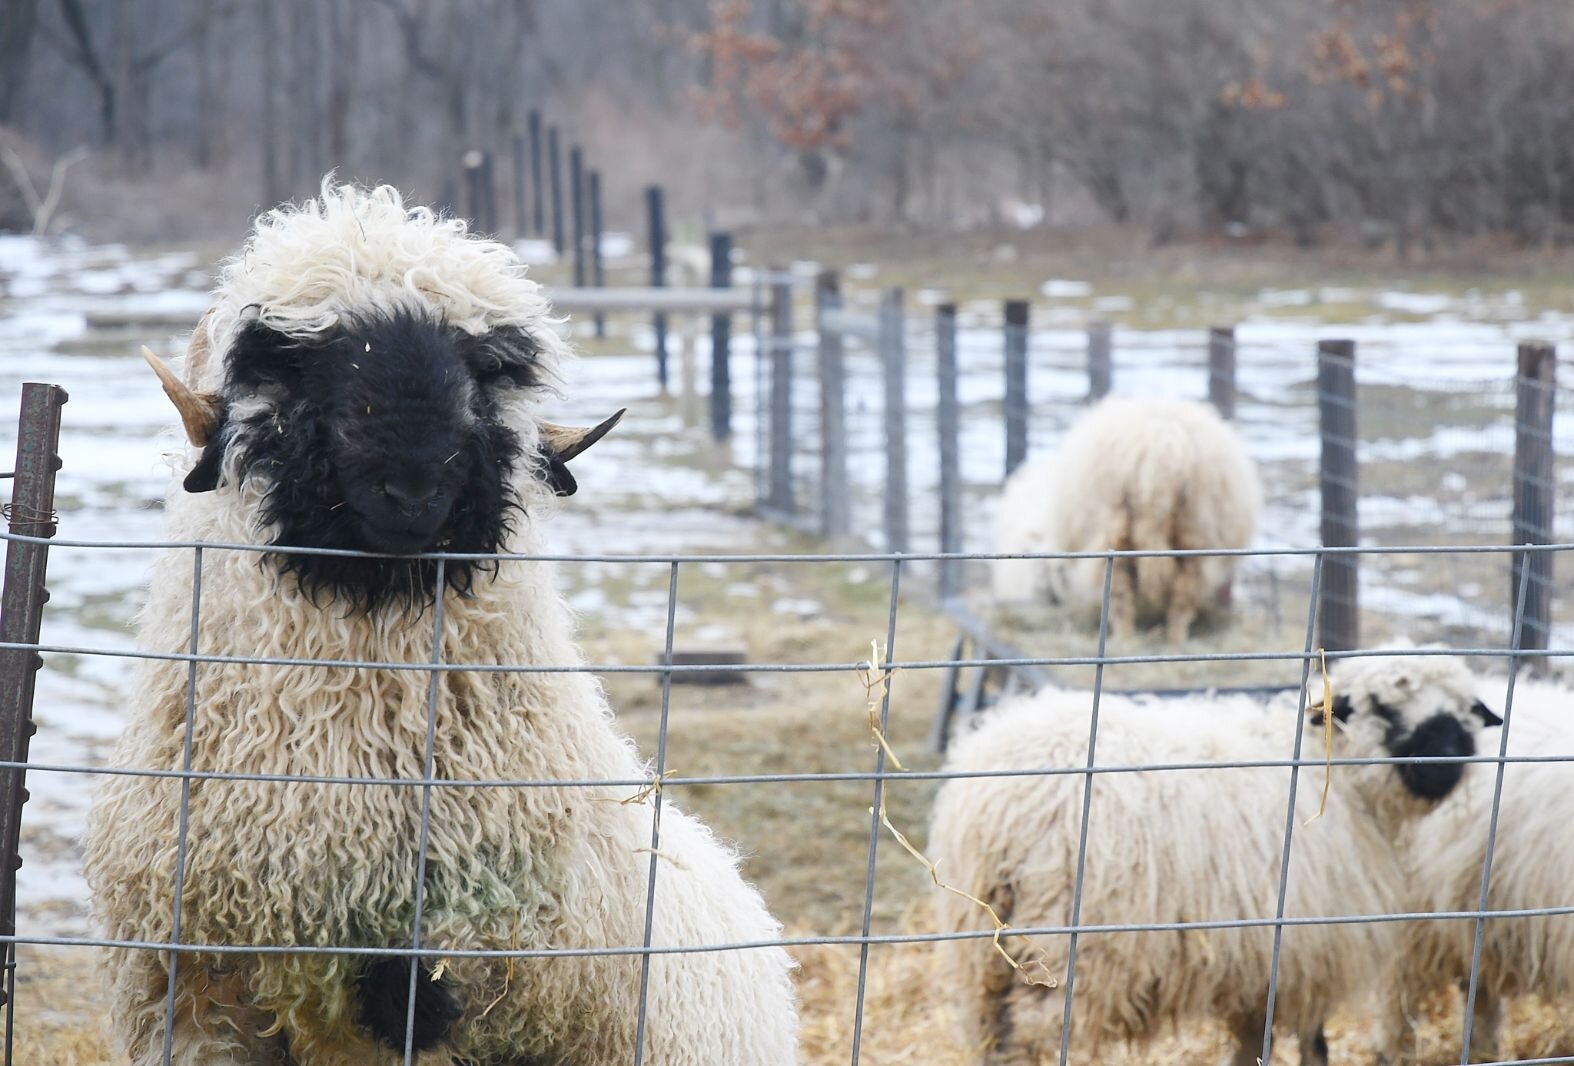 Rambo, a Valais Blacknose sheep, and some of the other sheep are seen on Zebolsky’s farm near Marshall.